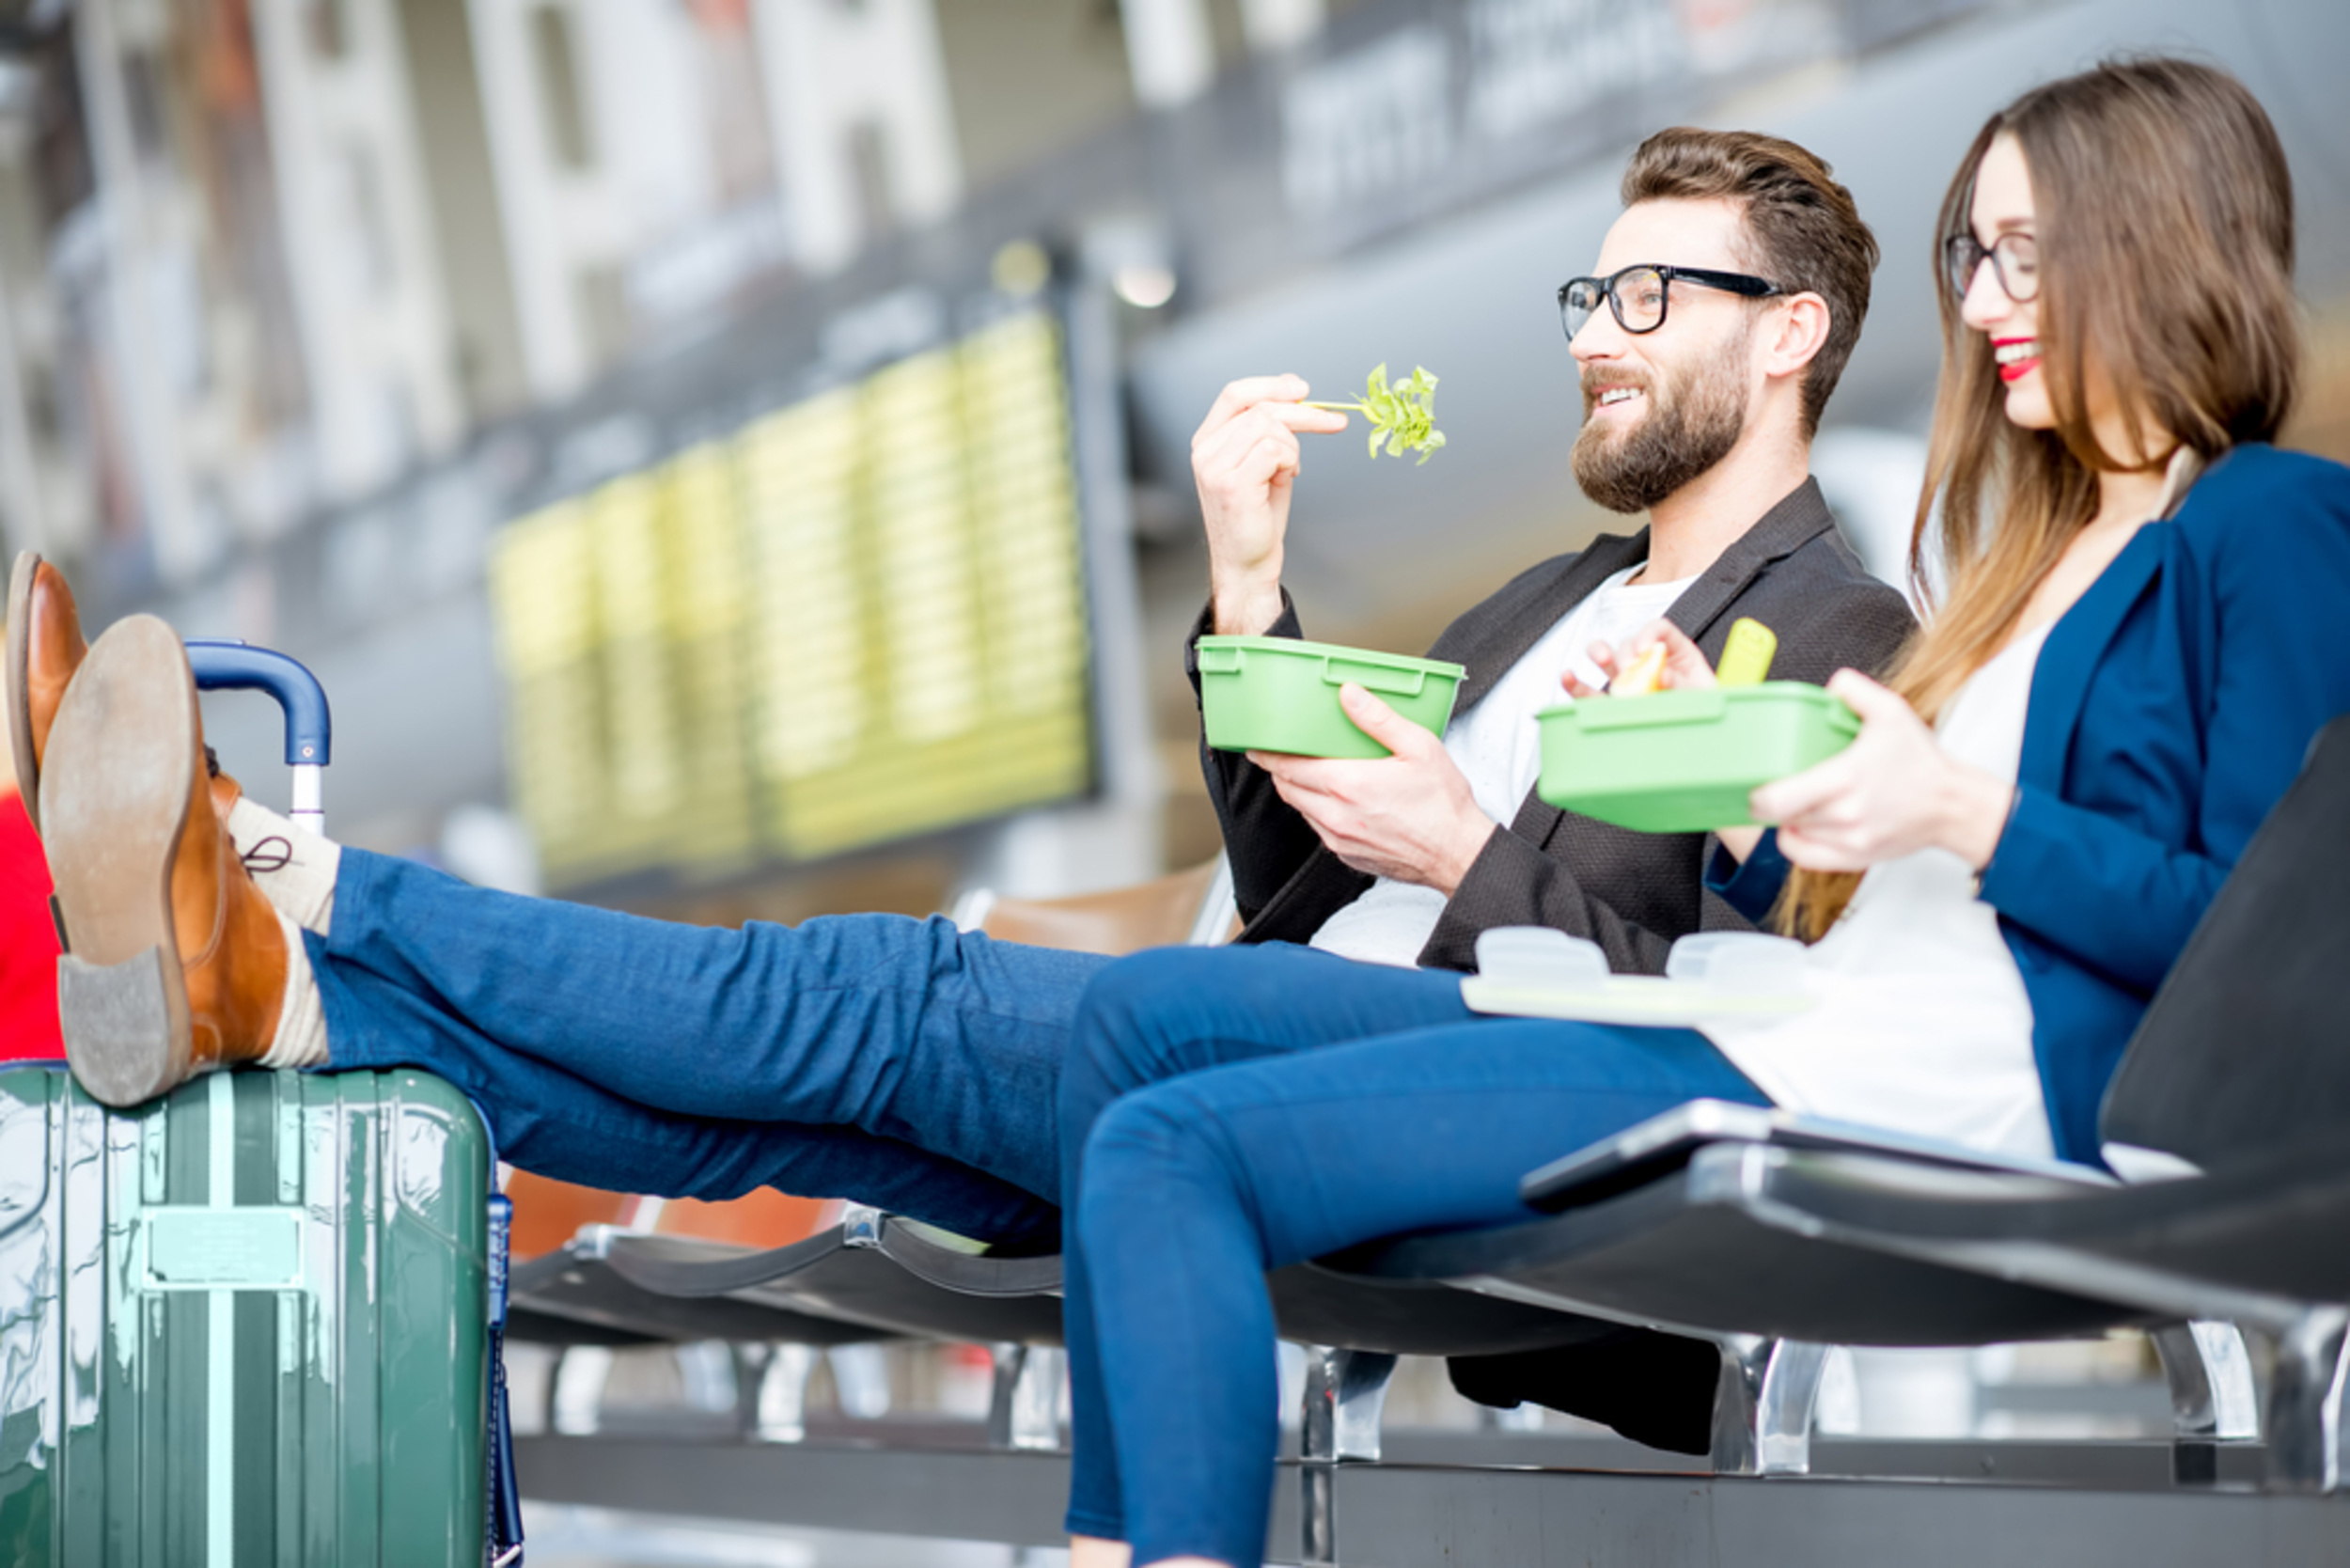 <p>After schlepping to the airport and making it through security, you're probably going to want a snack. Most solid foods can be brought through TSA screening checkpoints, and it's so much cheaper to bring your favorite snacks from home than pay a premium at airport shops. </p><p><a href='https://www.msn.com/en-us/community/channel/vid-cj9pqbr0vn9in2b6ddcd8sfgpfq6x6utp44fssrv6mc2gtybw0us'>Follow us on MSN to see more of our exclusive lifestyle content.</a></p>